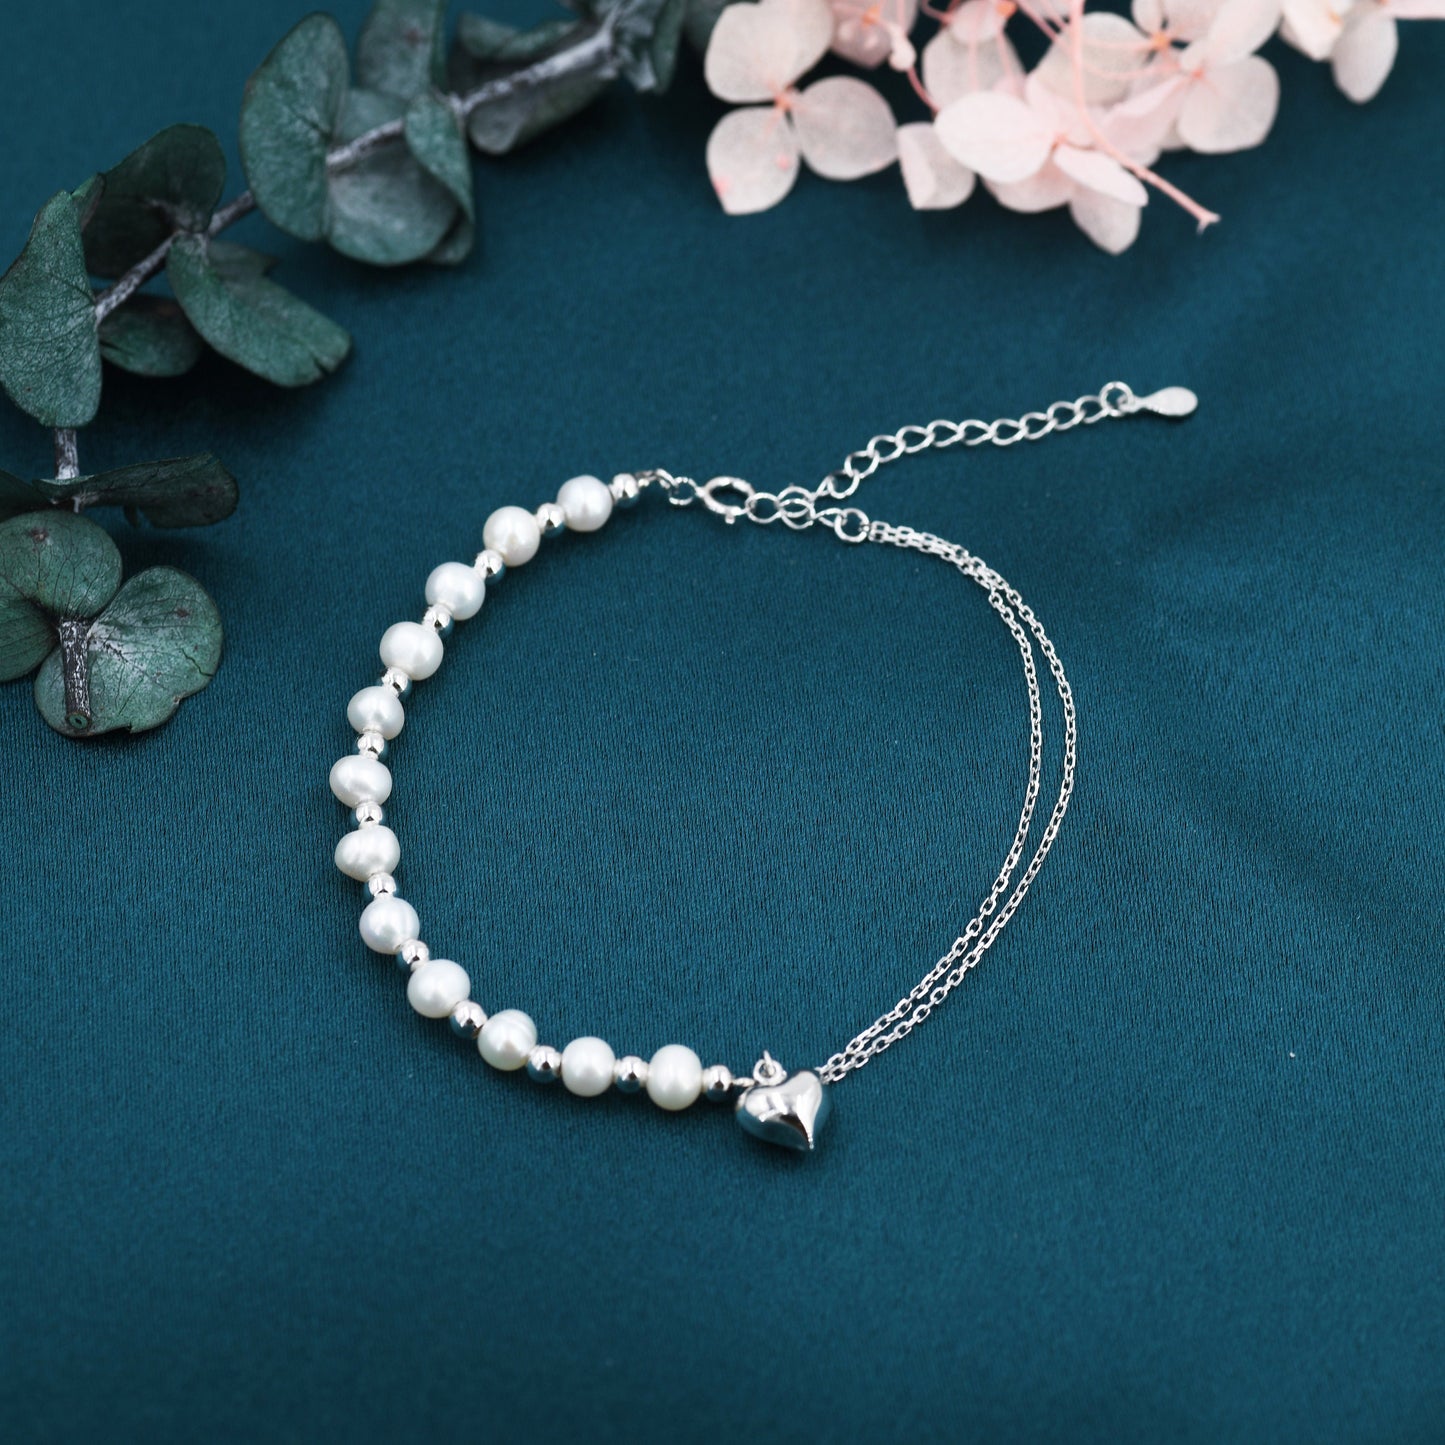 Sterling Silver Freshwater Pearl and Double Strand Beaded Bracelet with a Heart Charm, Silver or Gold, Genuine Pearls, Natural Pearl